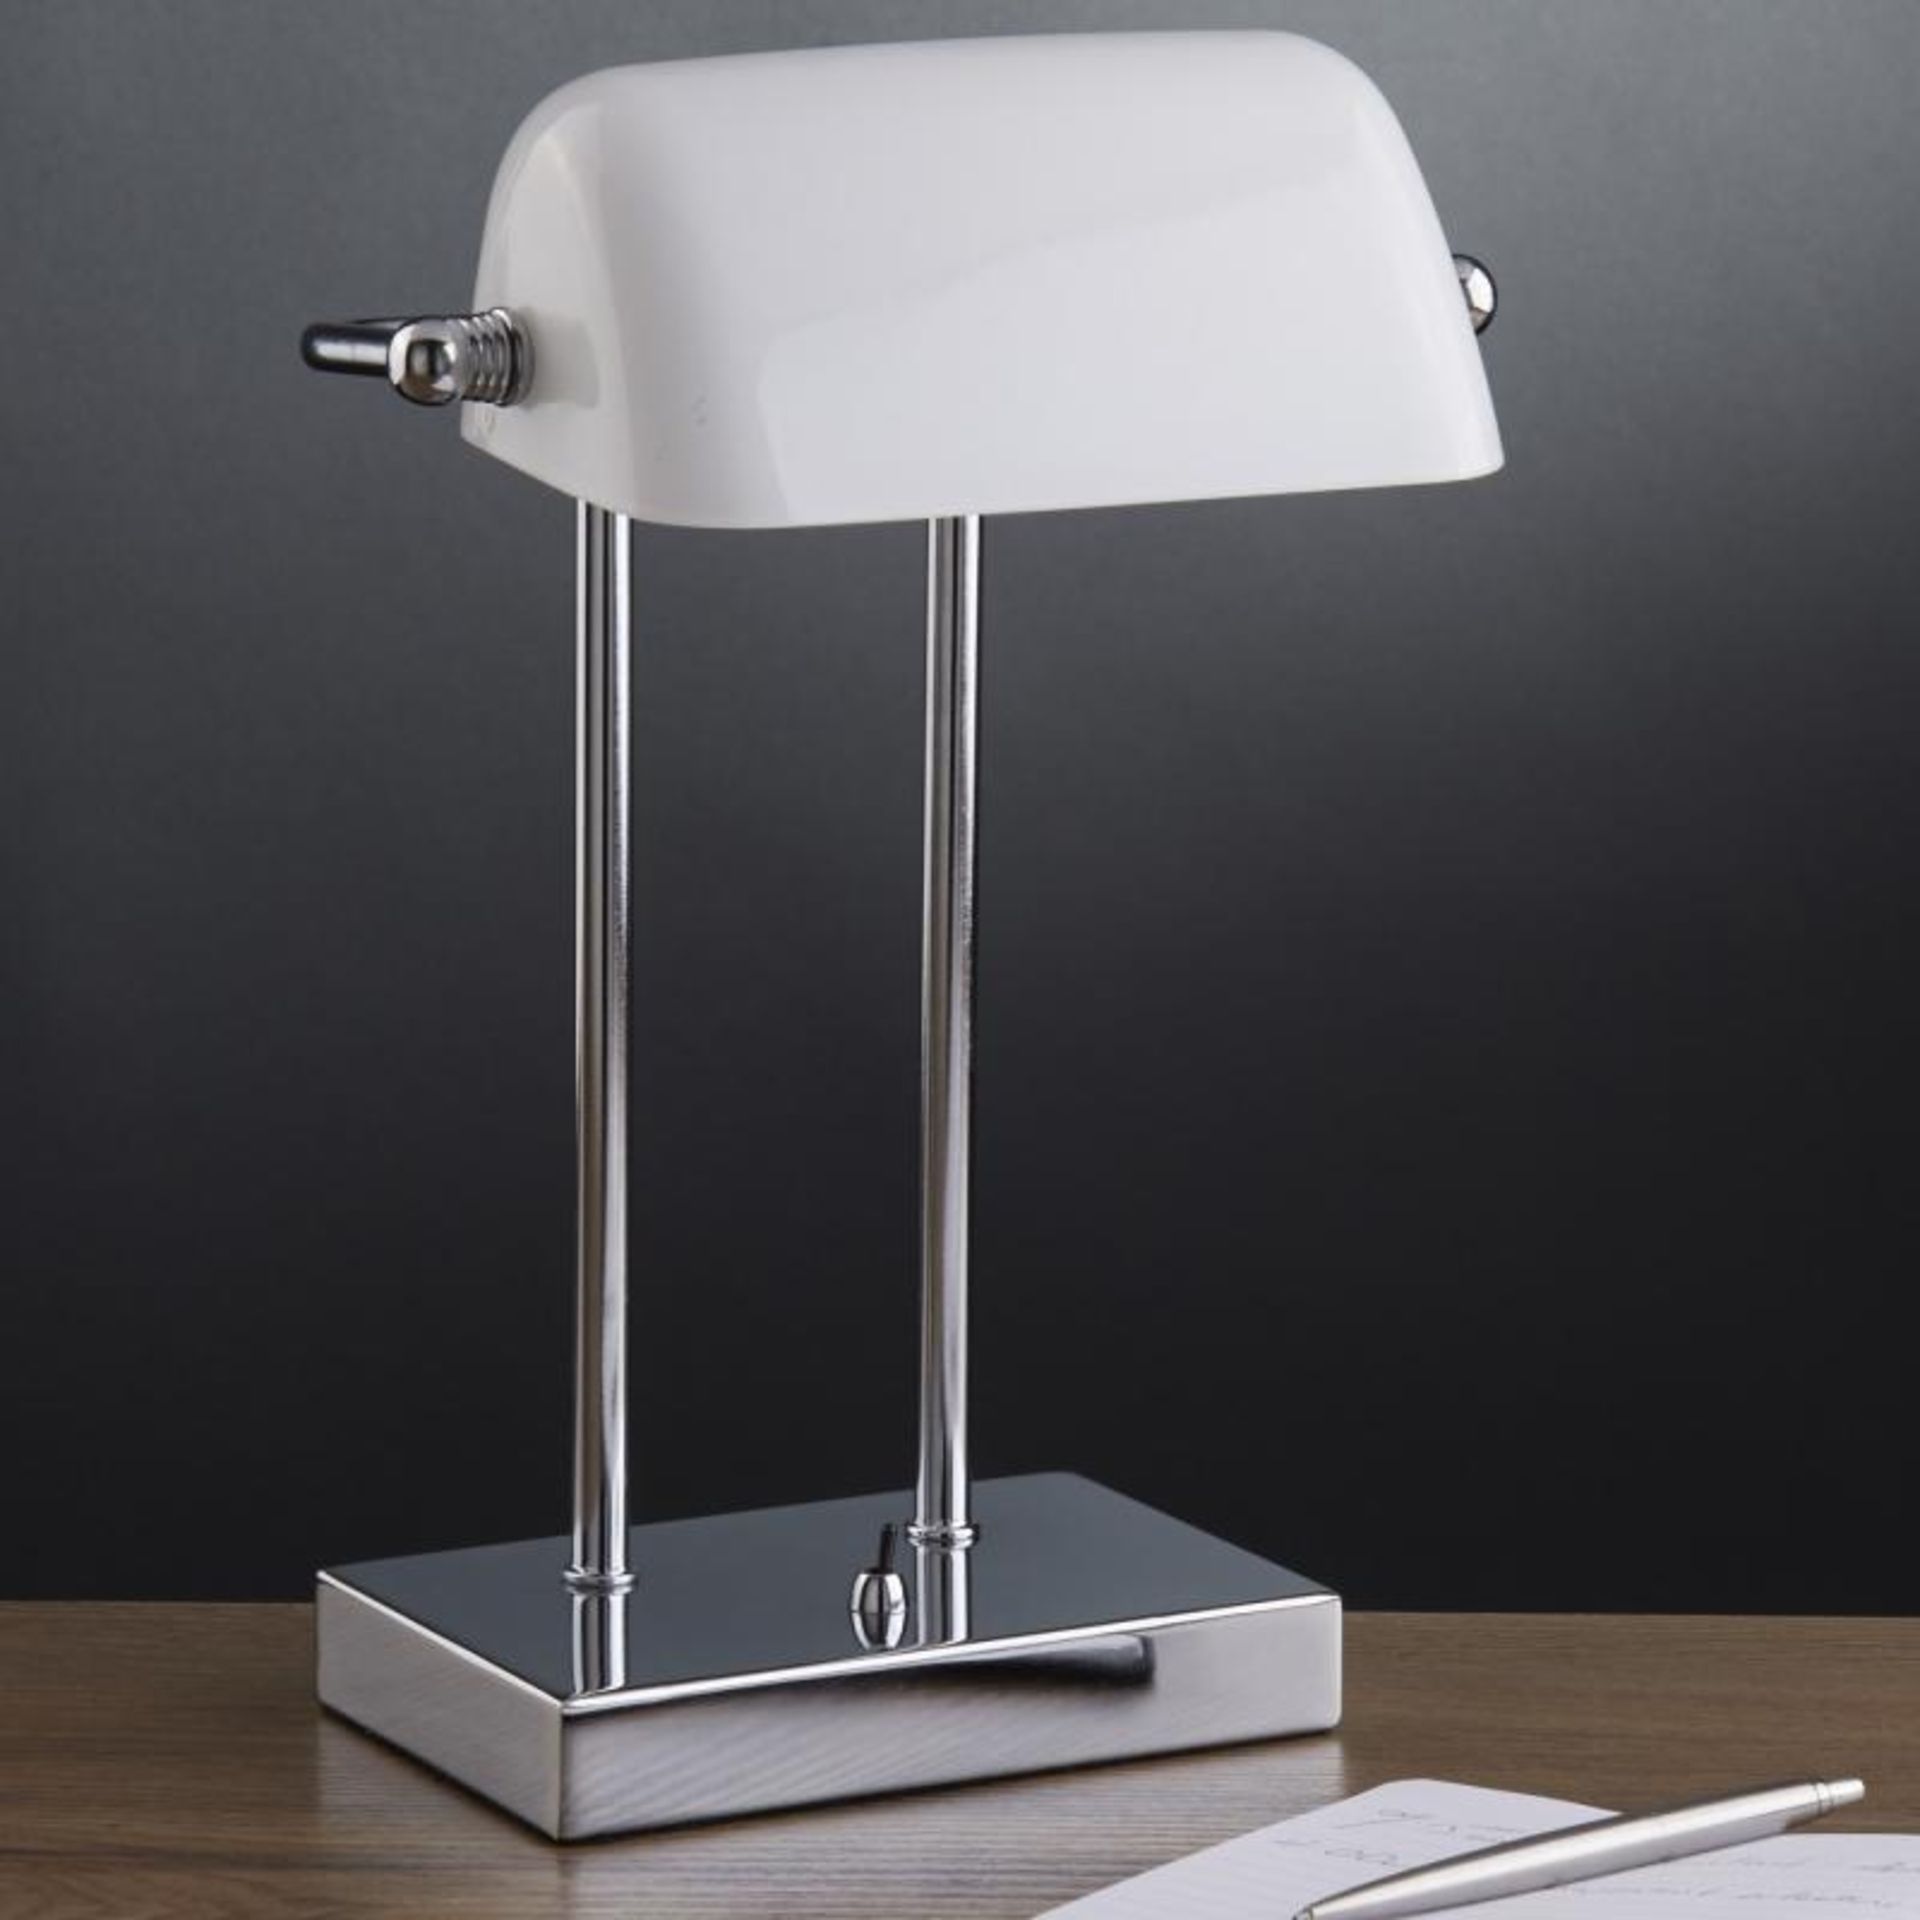 1 x Bankers Style Chrome Table Lamp With White Glass Shade - New Boxed Stock - CL323 - Ref: 1200CC / - Image 3 of 3